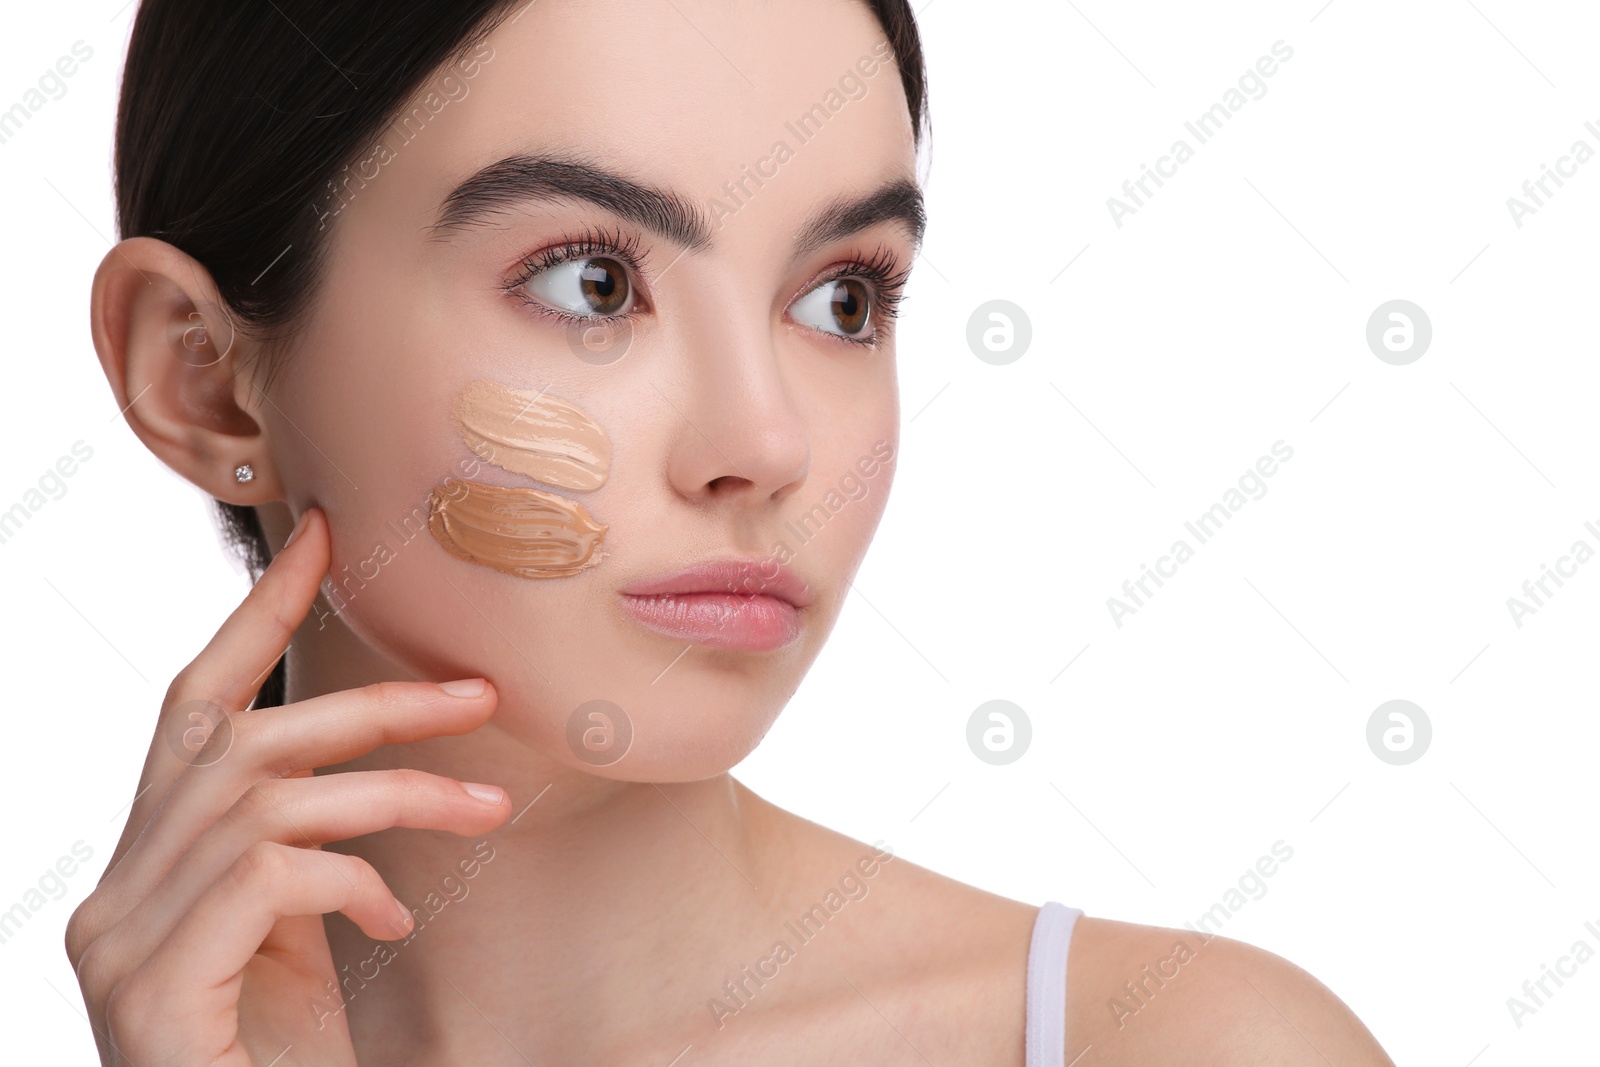 Photo of Teenage girl with swatches of foundation on face against white background